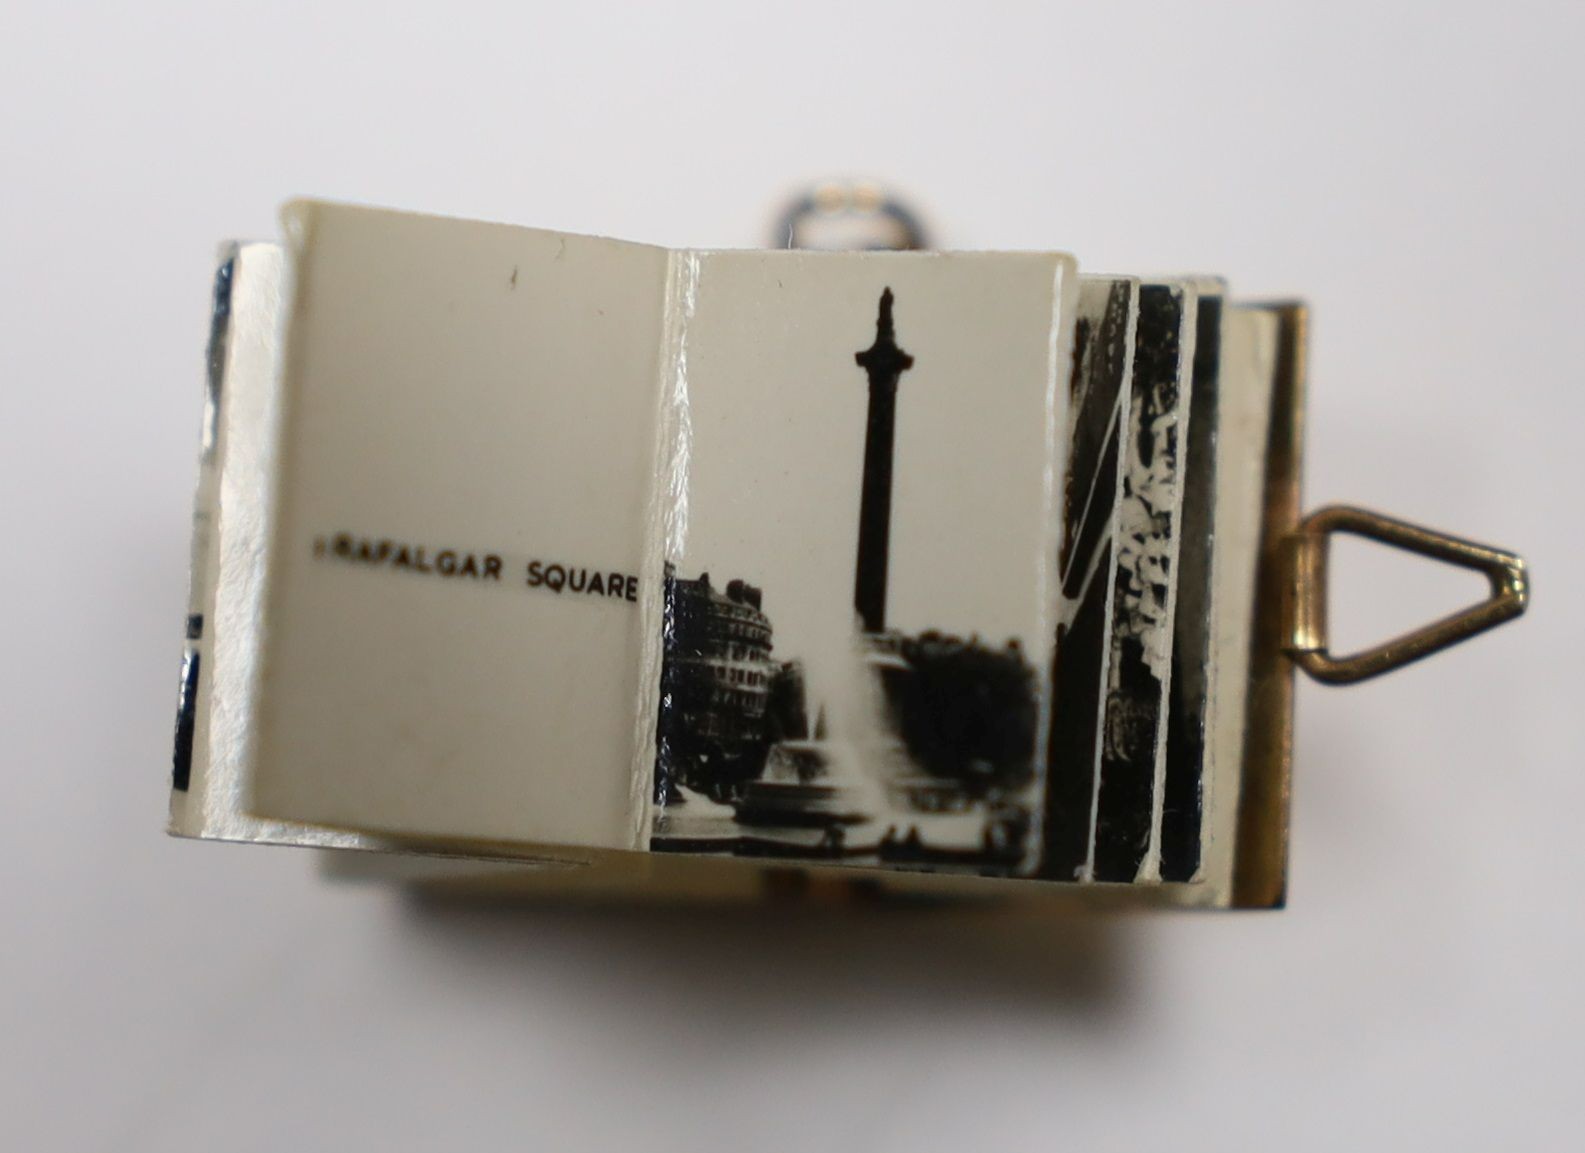 An enamelled 9ct gold photograph album charms with views and crest of London, 1.5cm gross 3.1 grams